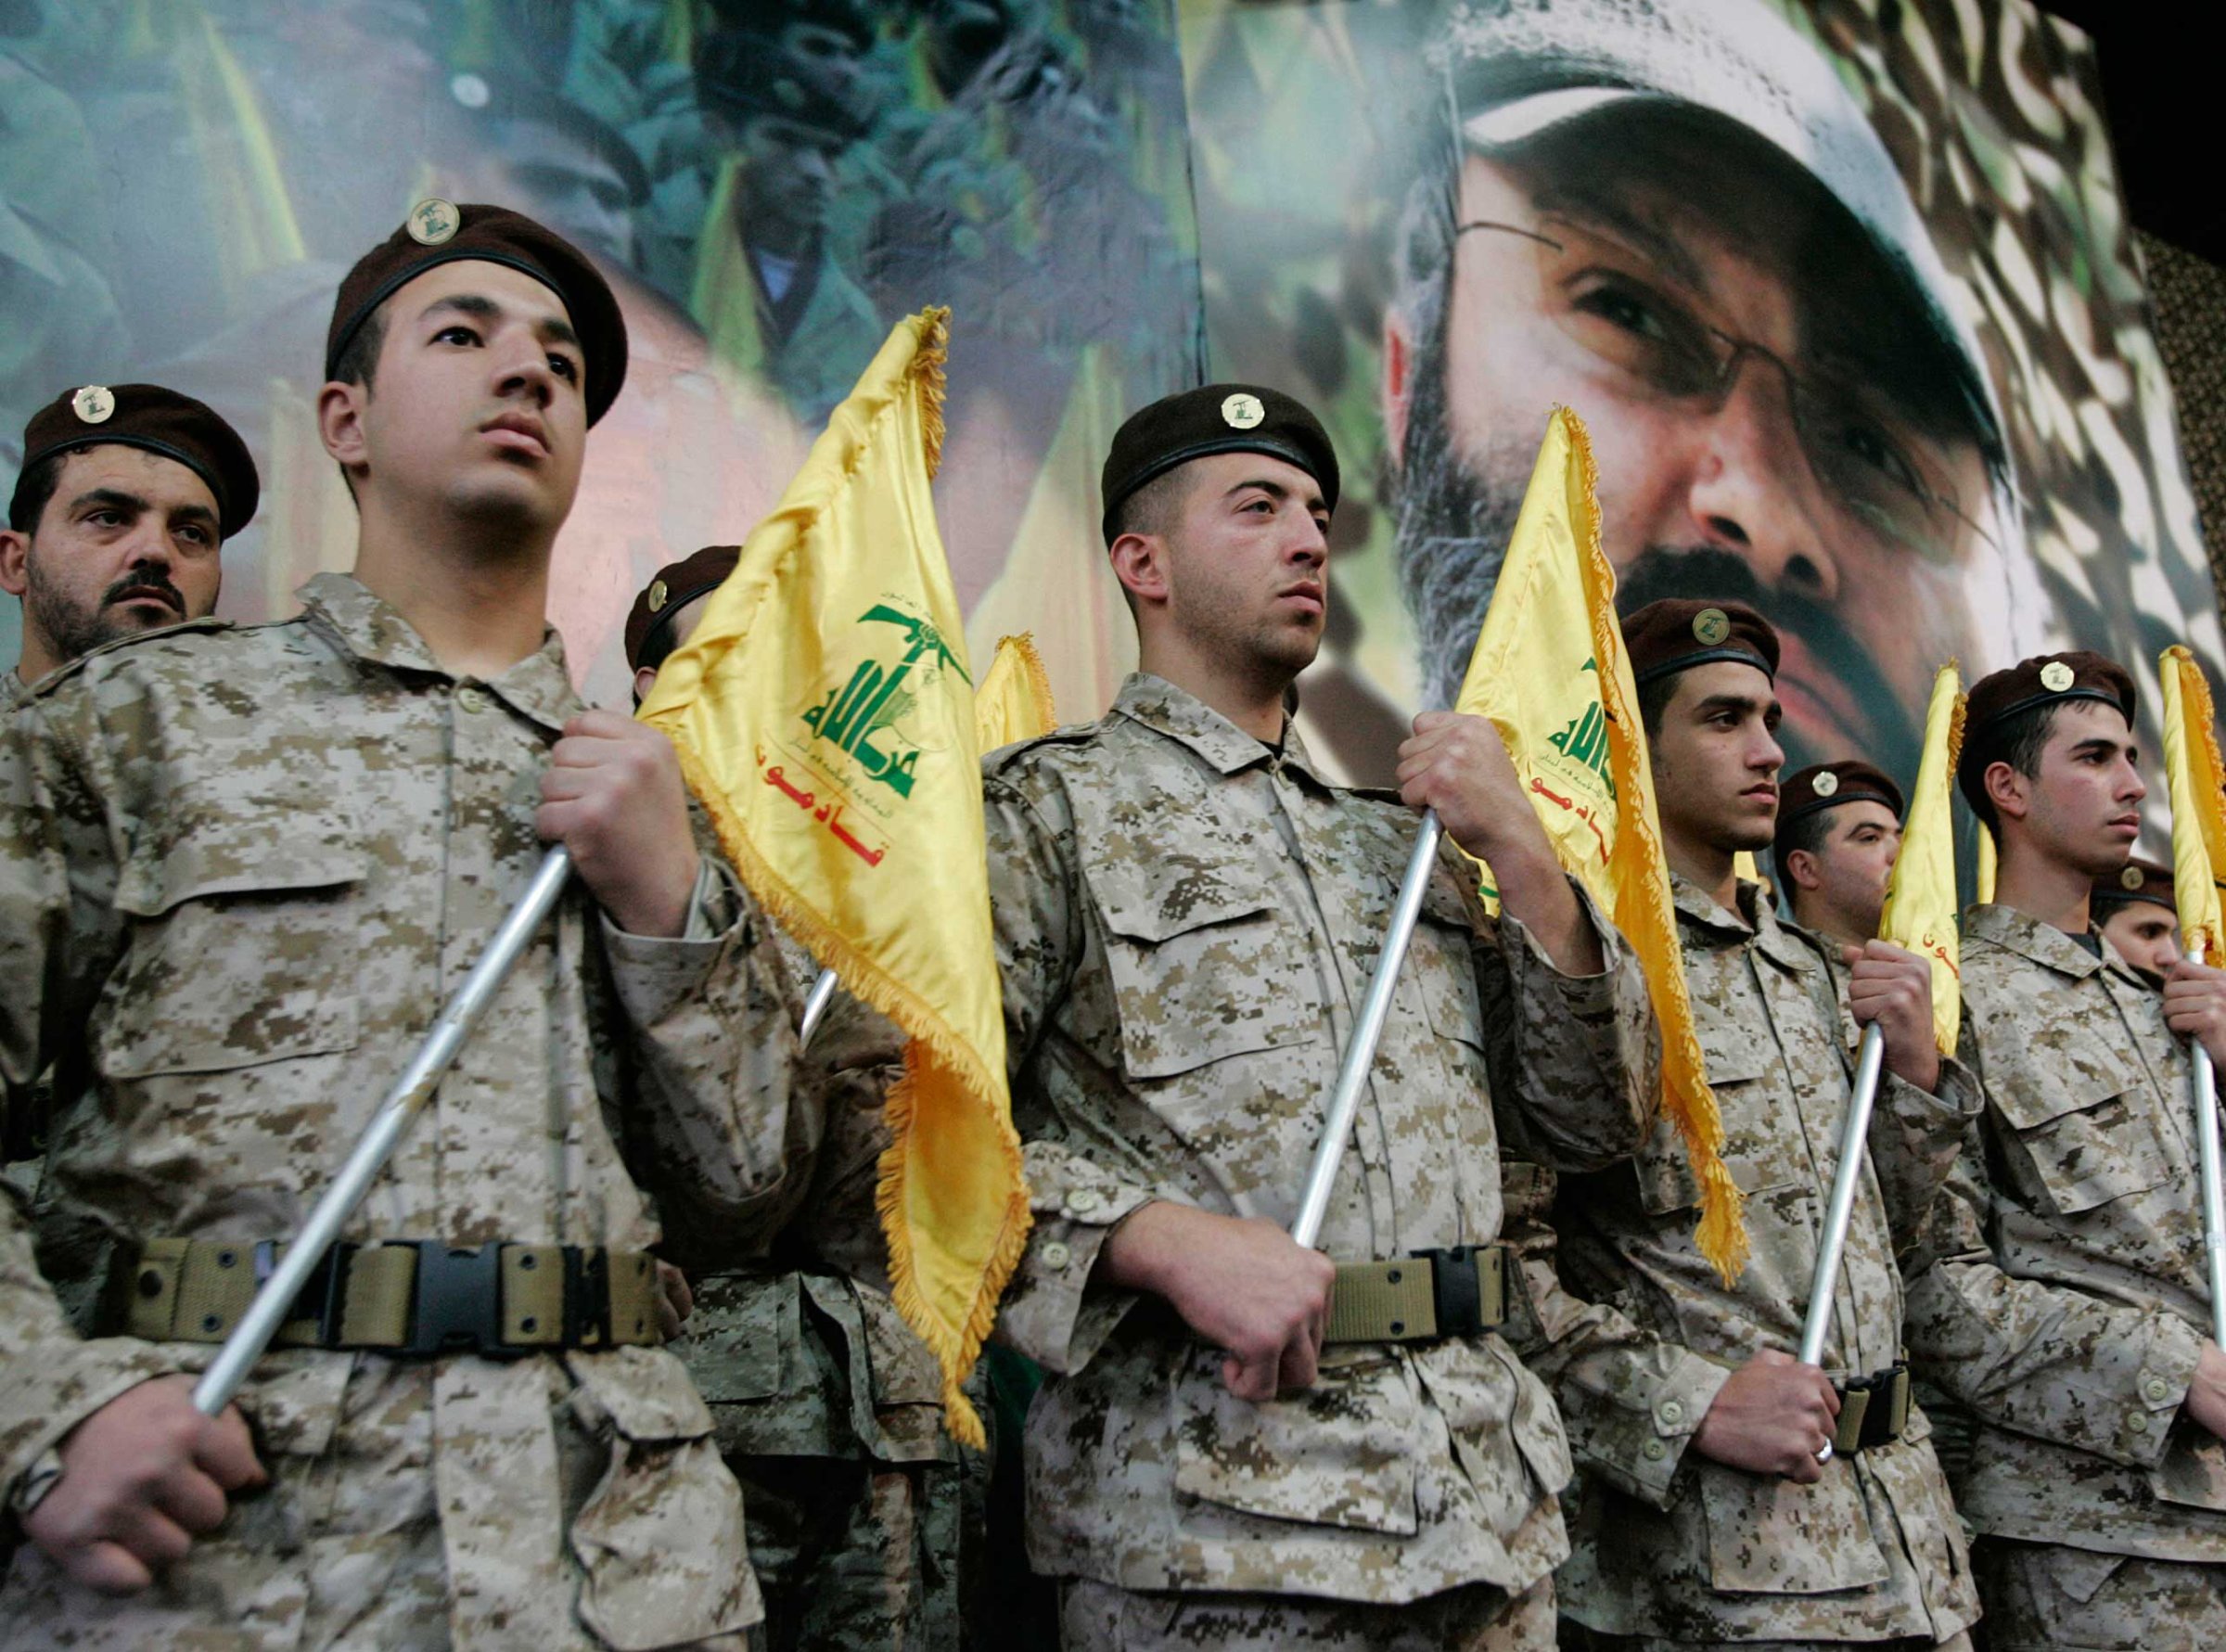 Hezbollah fighters hold their party flags and stand next to a portrait which shows their slain top commander Imad Mughniyeh, as they attend a rally to commemorate Mughniyeh and two other leaders, Abbas Musawi and Ragheb Harb, in the Shiite suburb of Beirut, Feb. 22, 2008.